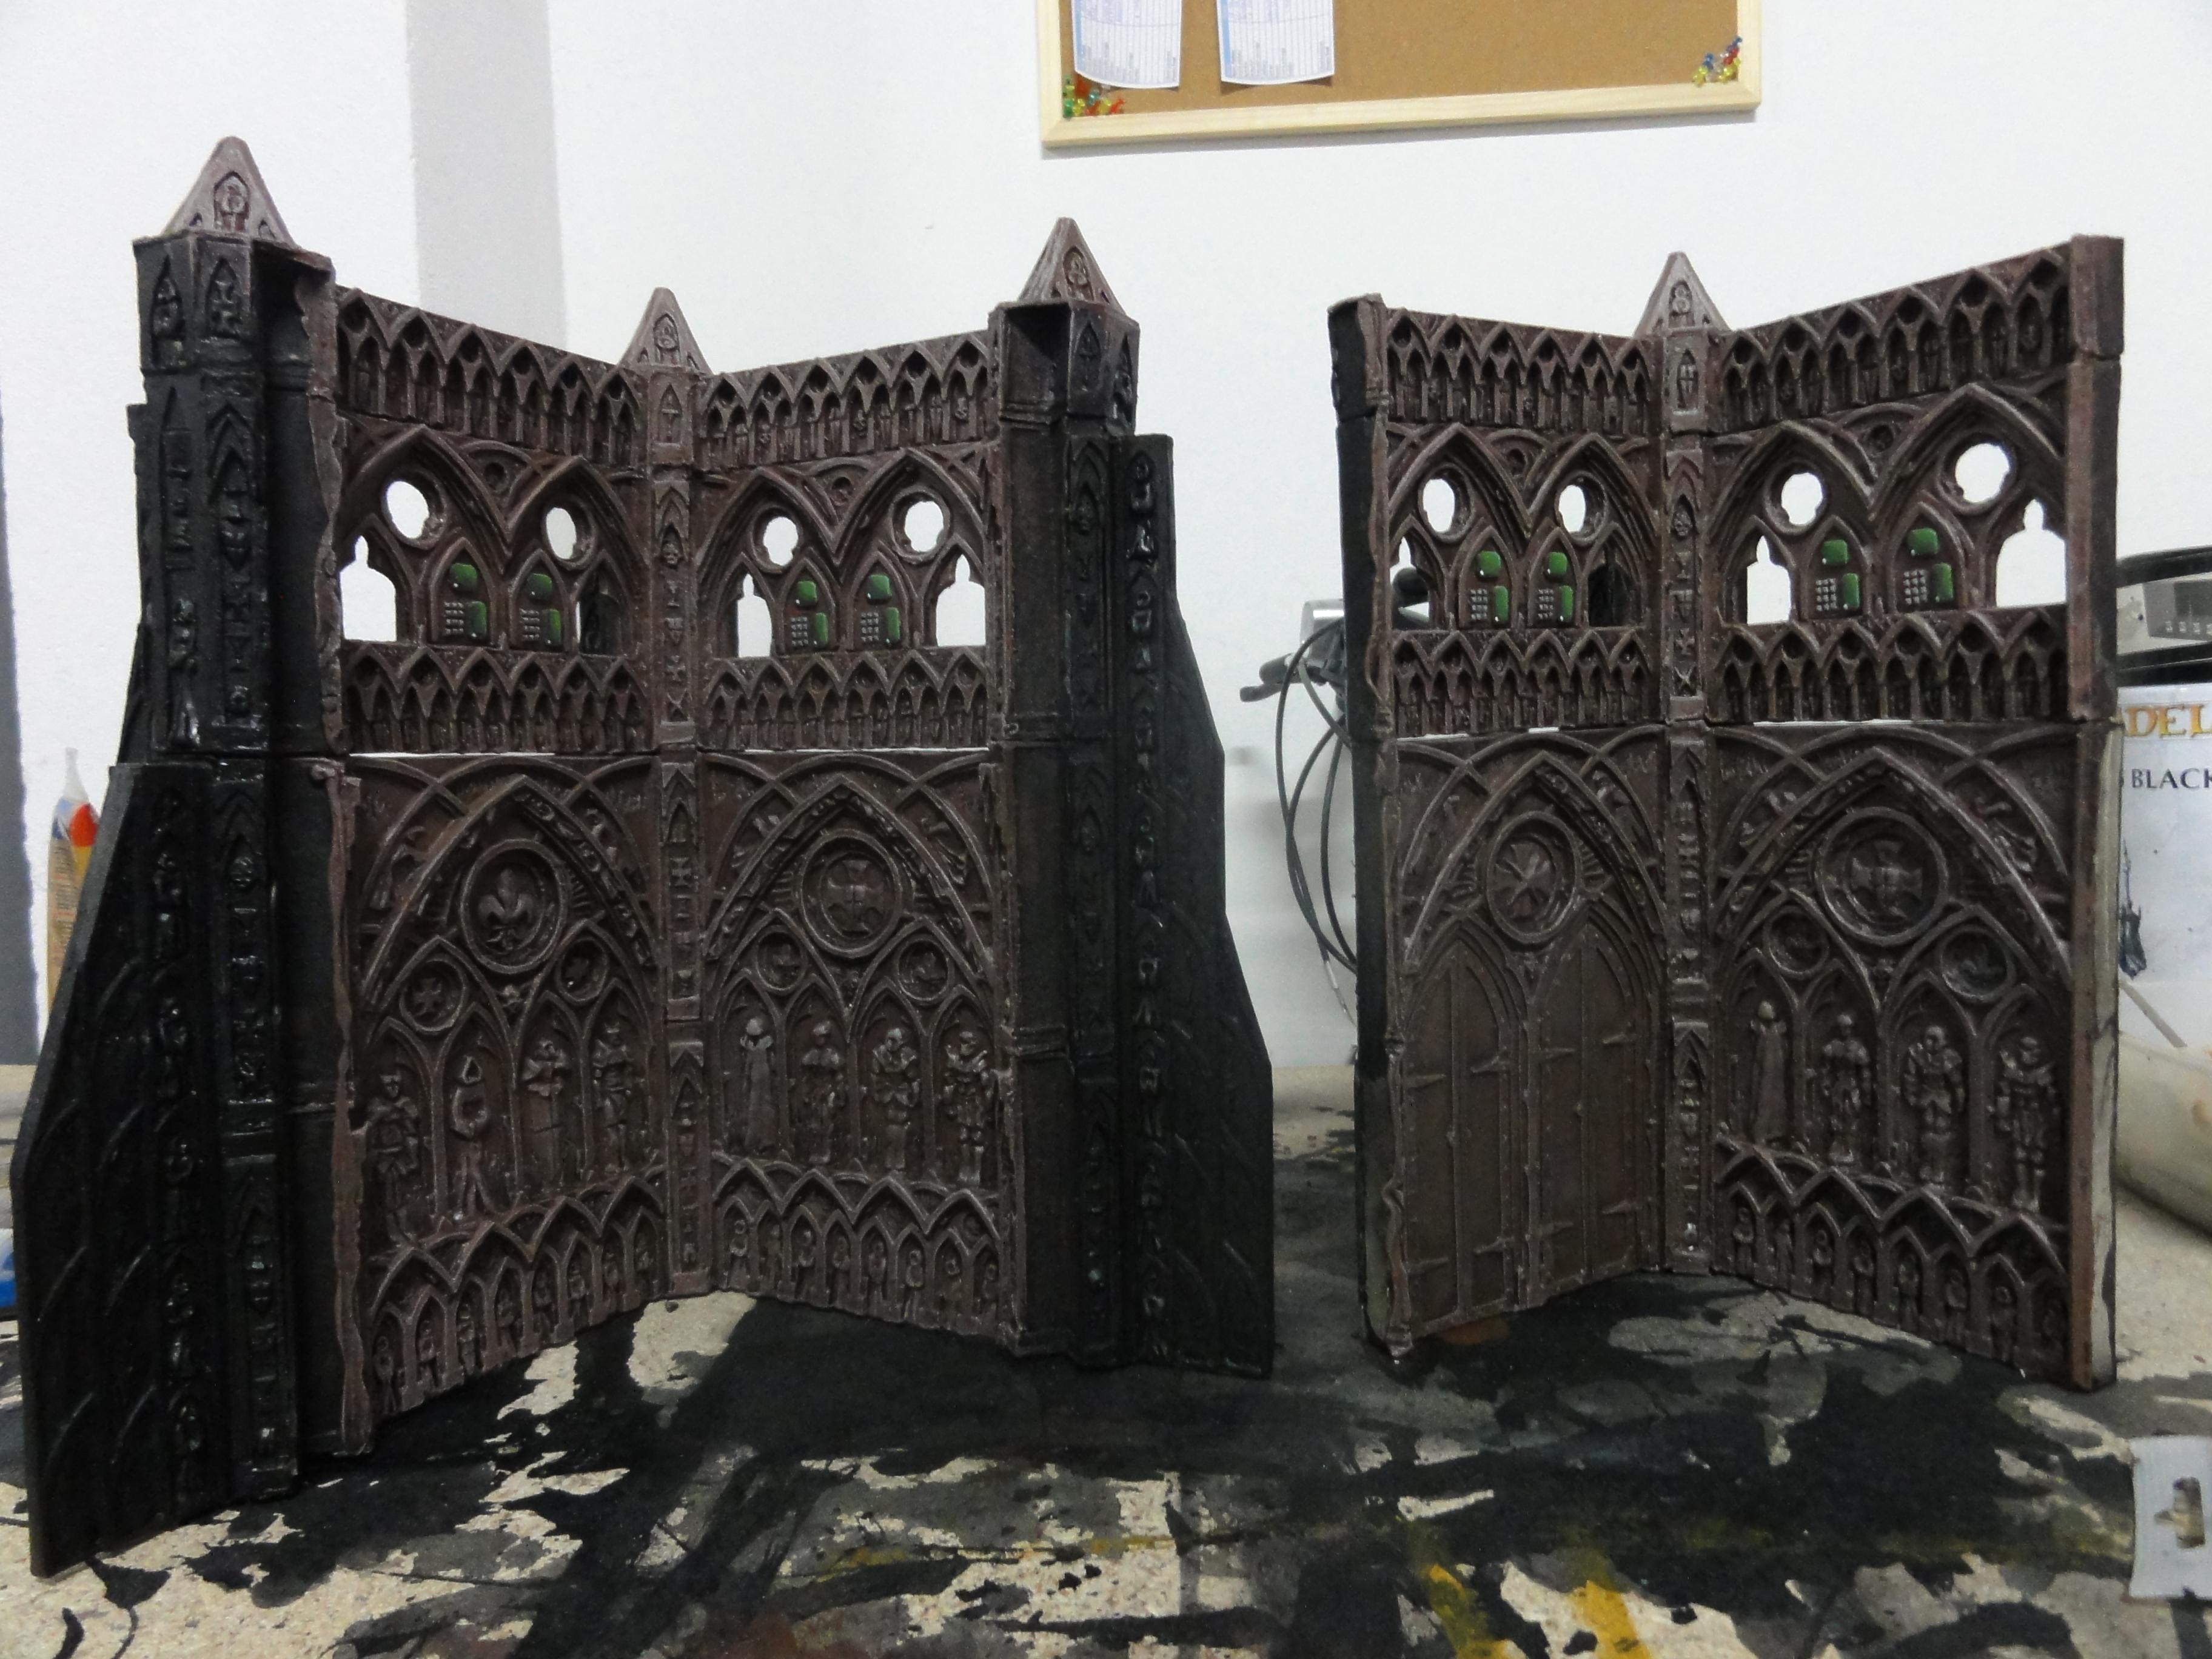 Work in progress of the interior of my gothic sentry tower